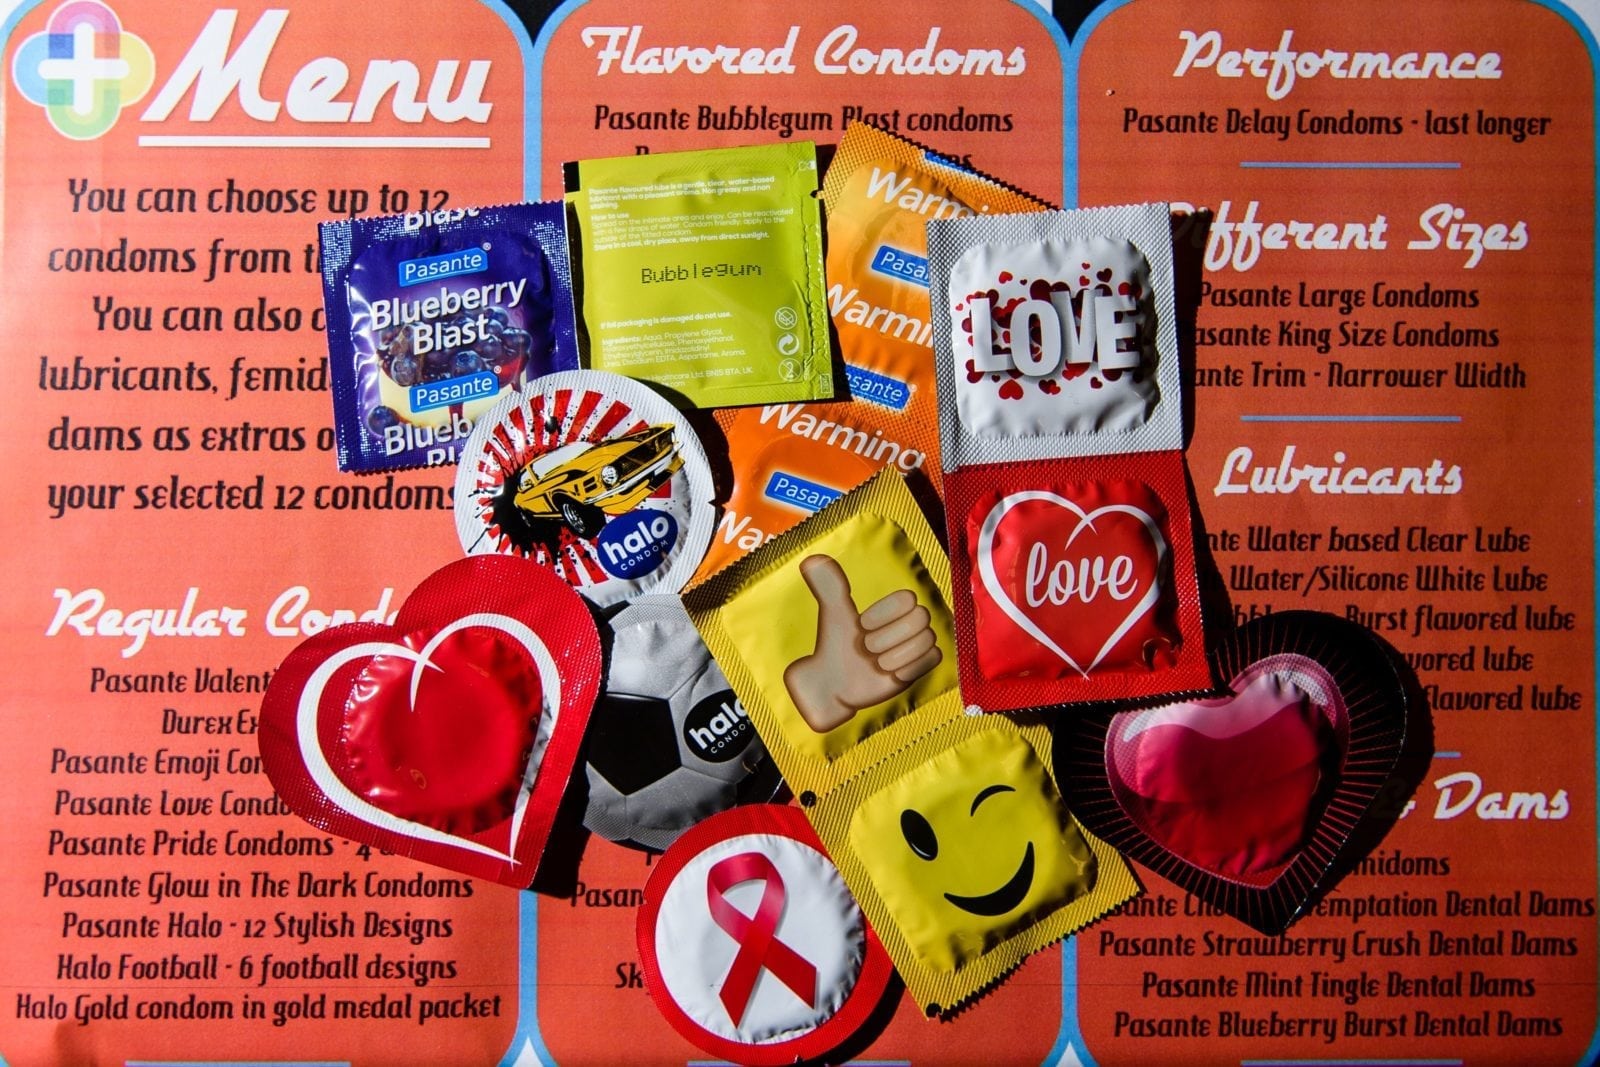 A selection of unusual condoms are displayed at the Valentine's Condom pop-up shop in eas...